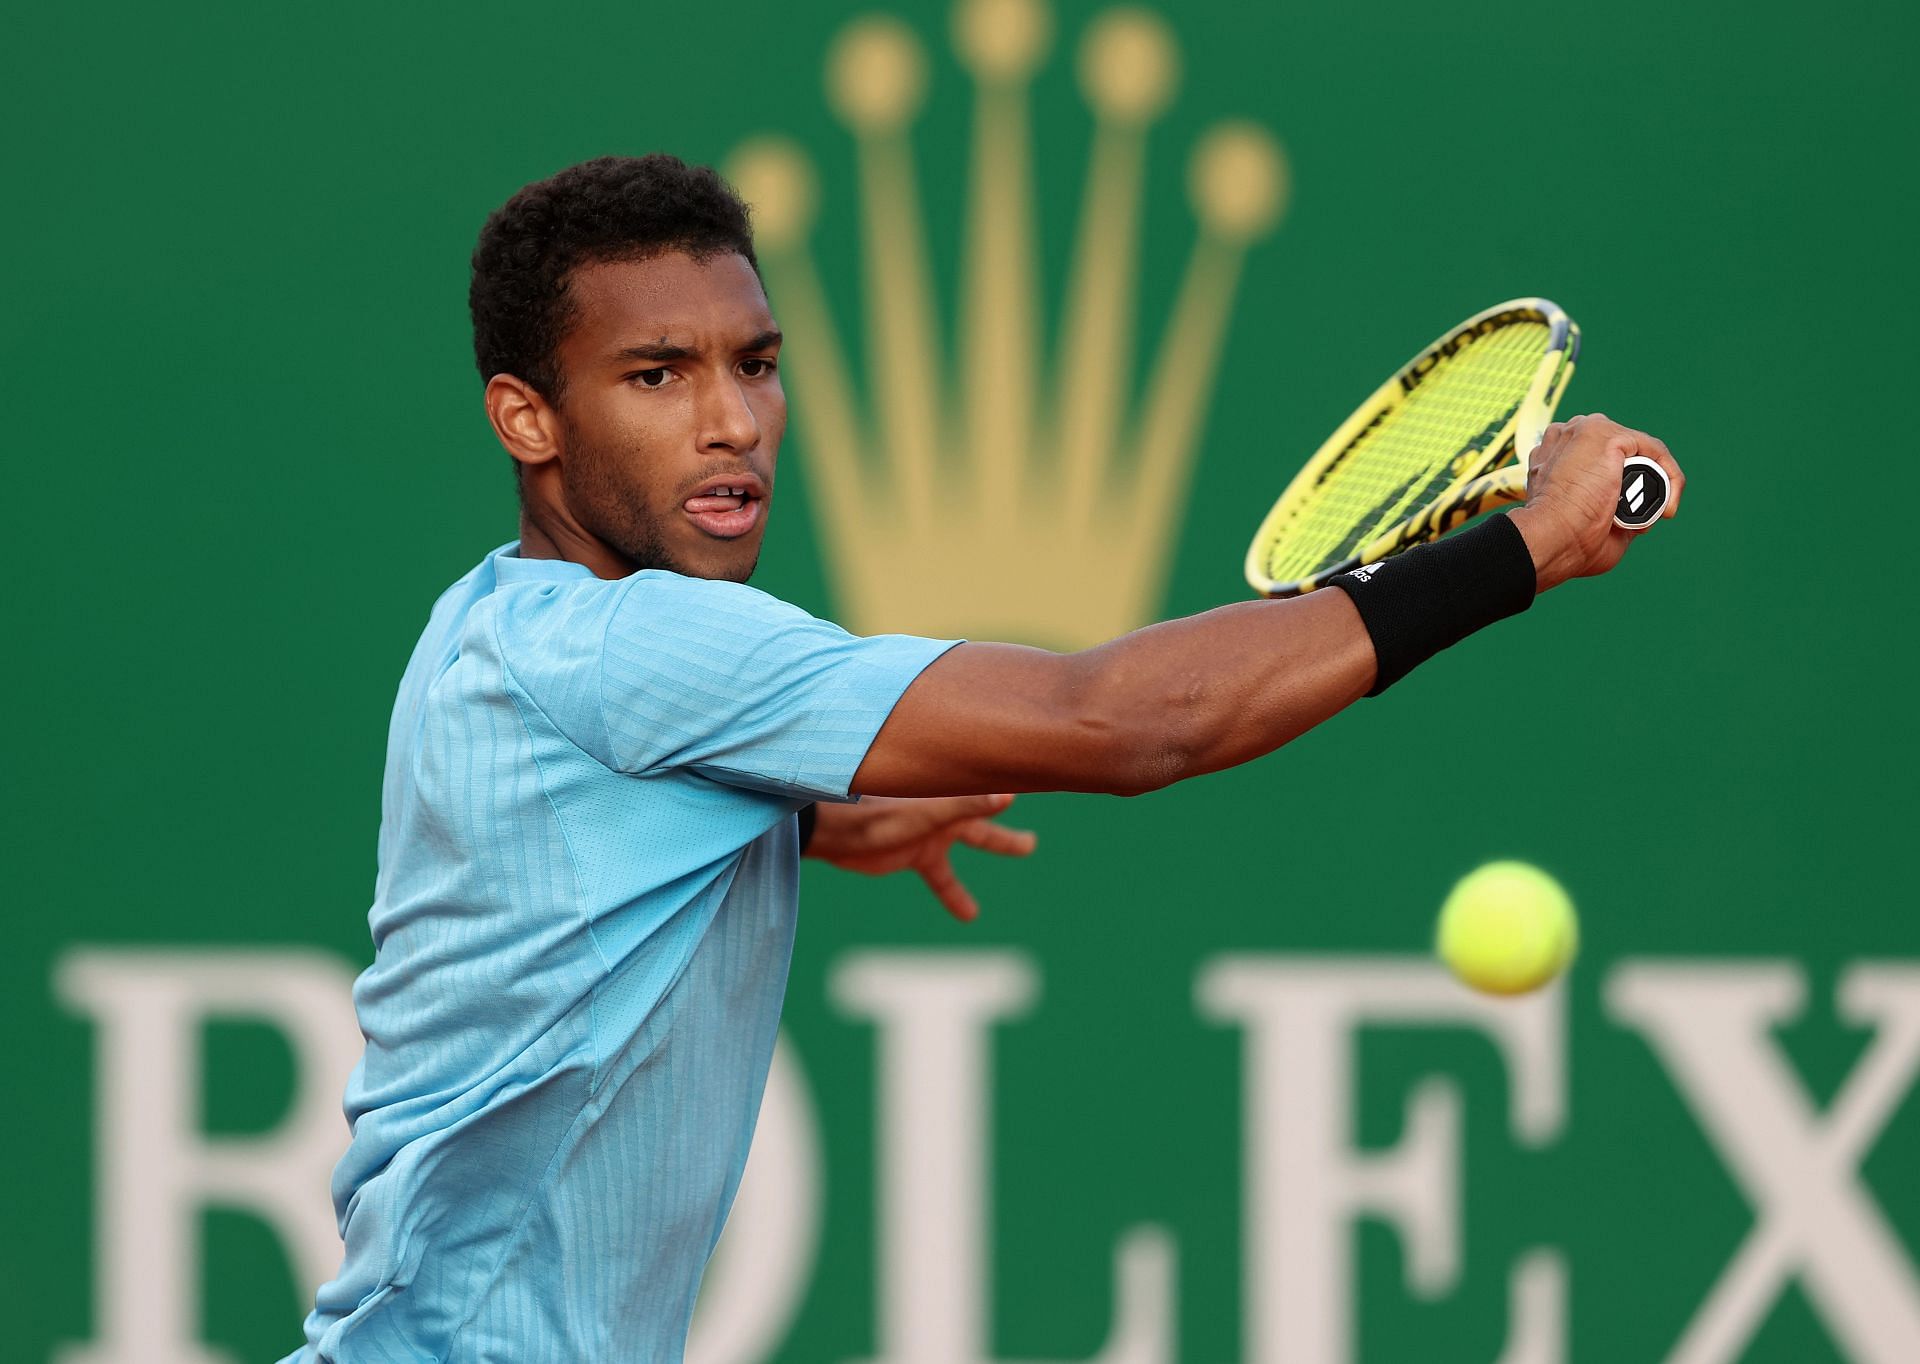 Barcelona Open 2022 Felix Auger-Aliassime vs Carlos Taberner preview, head-to-head, prediction, odds and pick